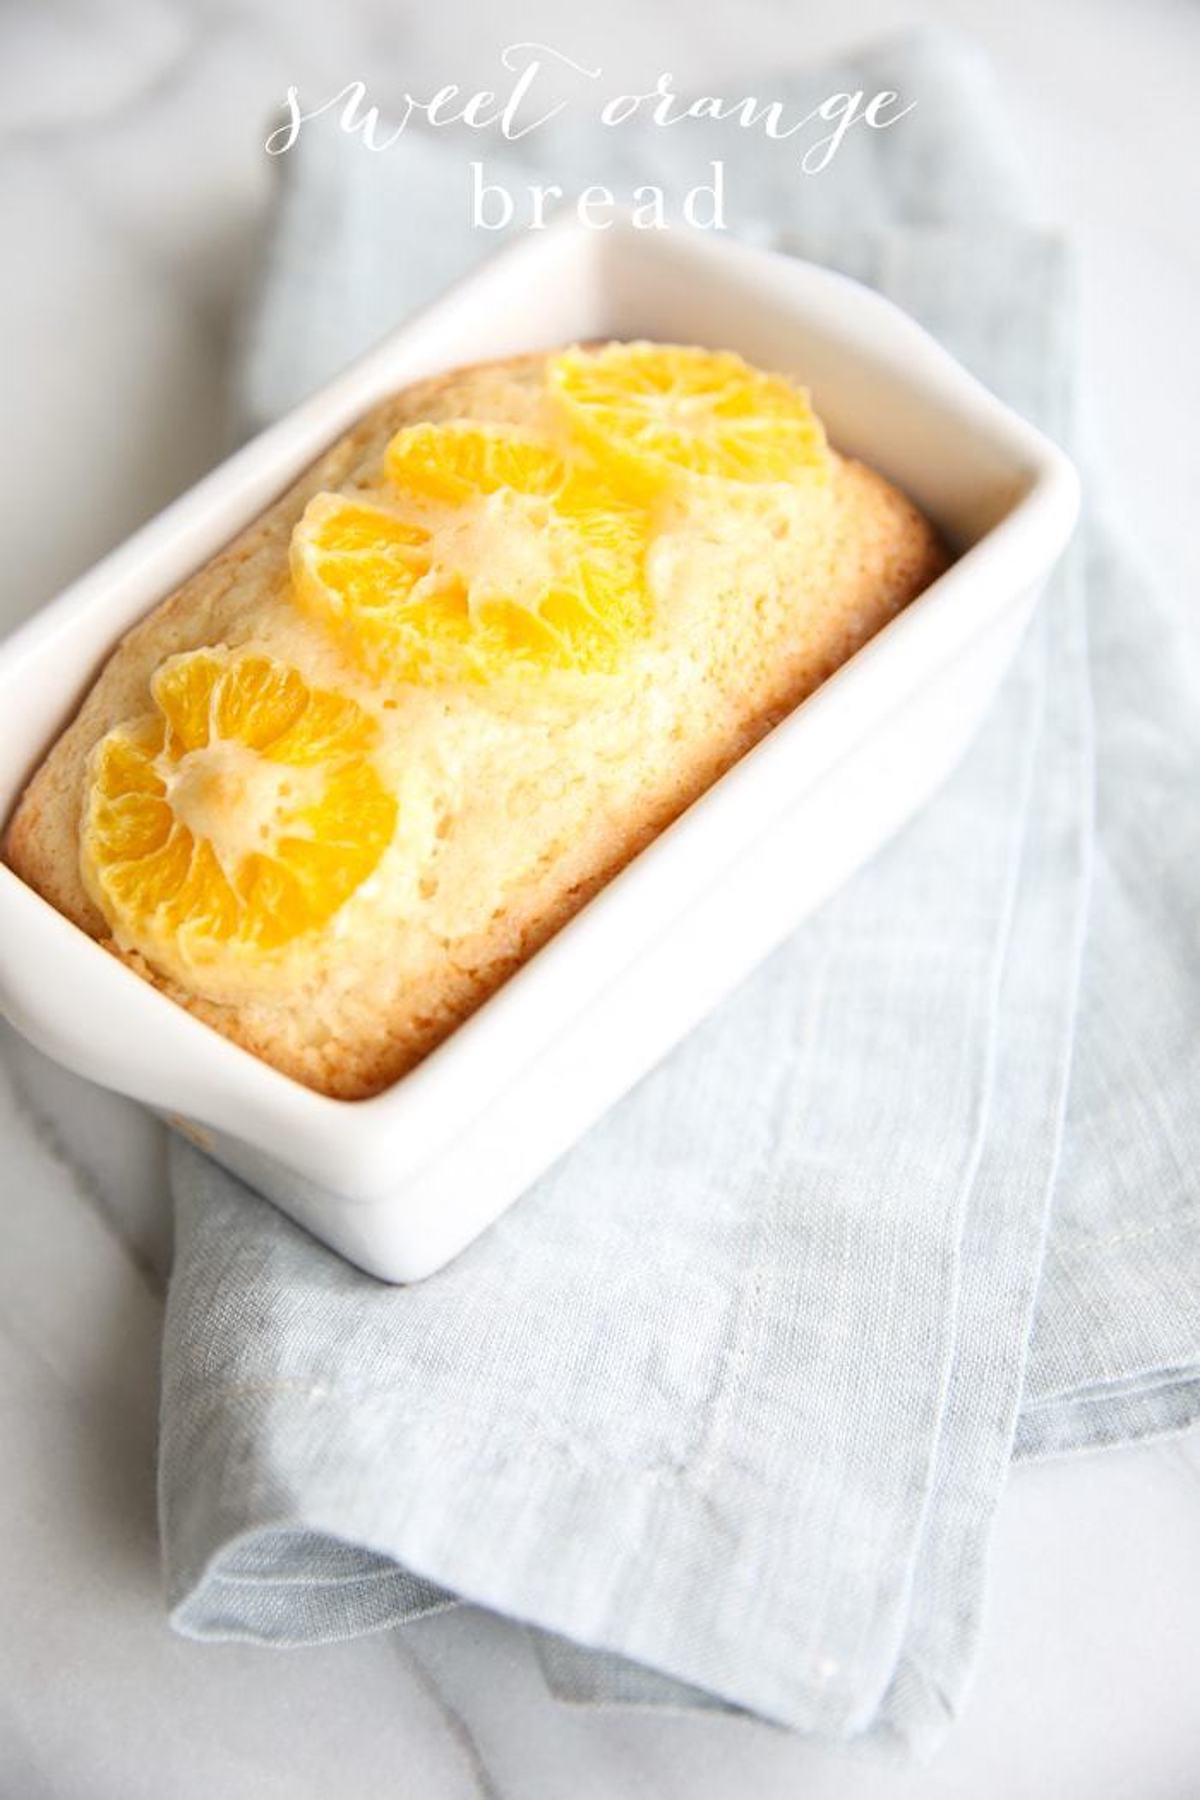 A loaf of quick orange bread in a white ceramic baking dish, placed on a light blue cloth. The sweet bread is topped with orange slices.